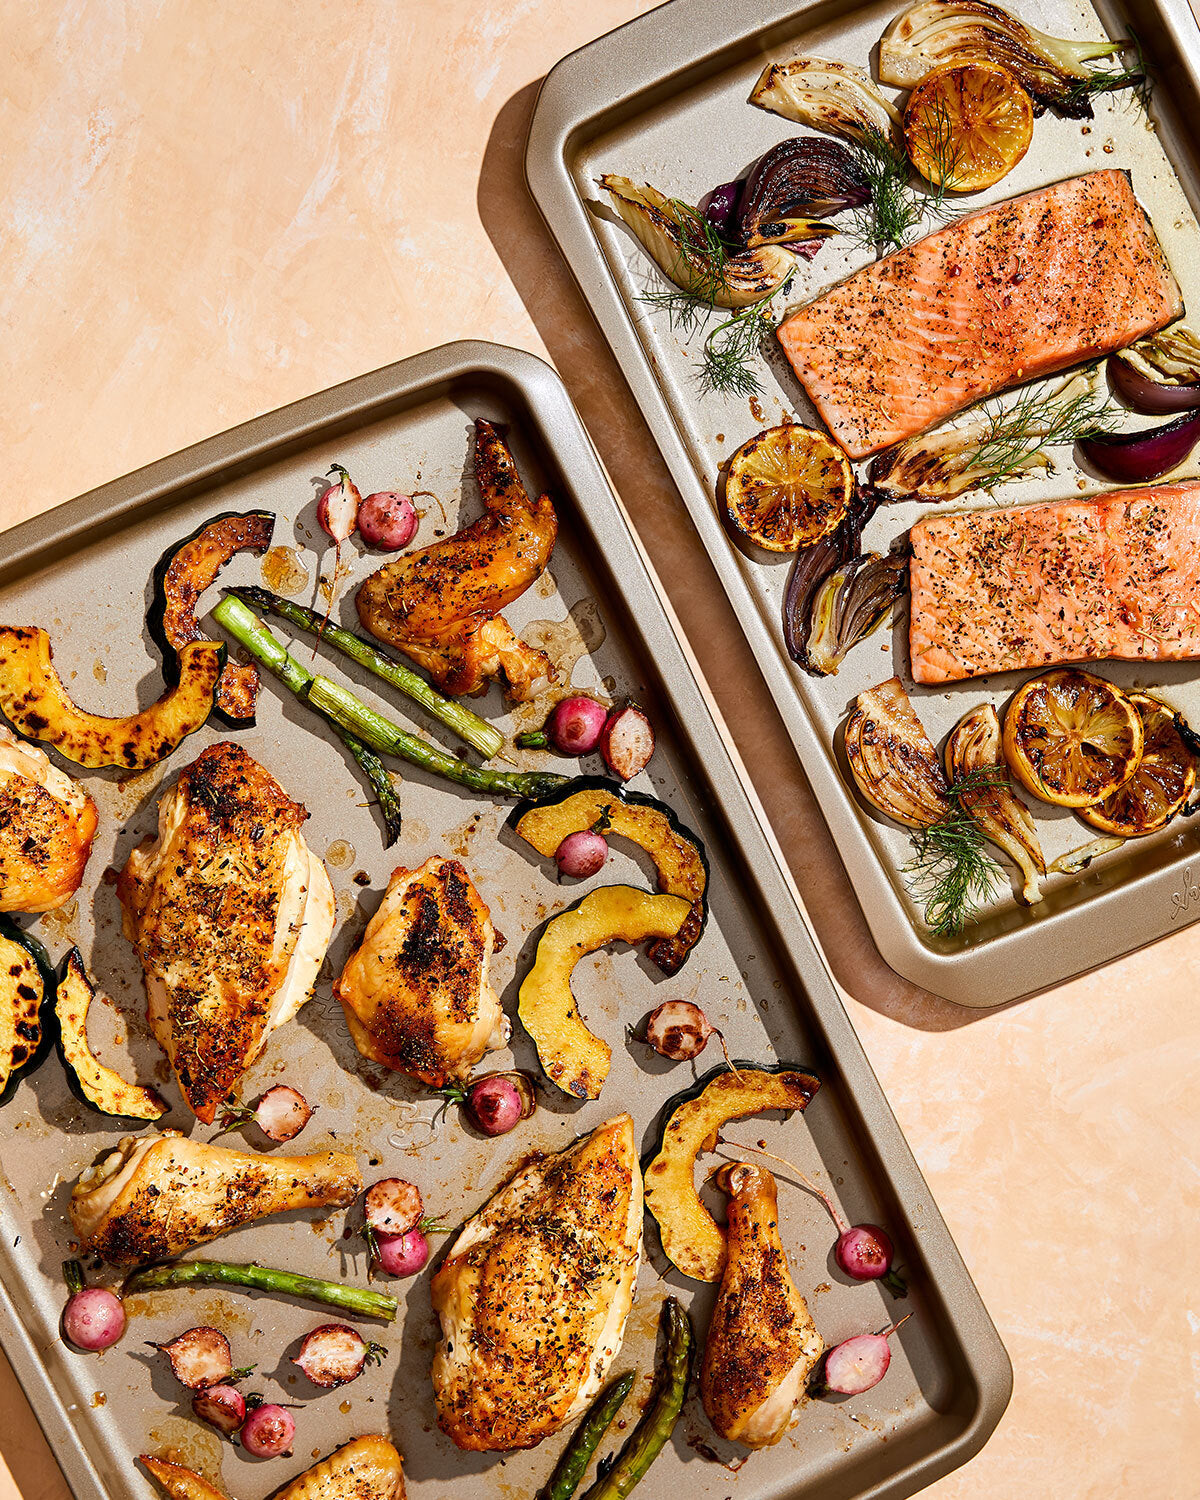 How to Use Our Chicken Dinner Spice Kit—For More Than Just Chicken!